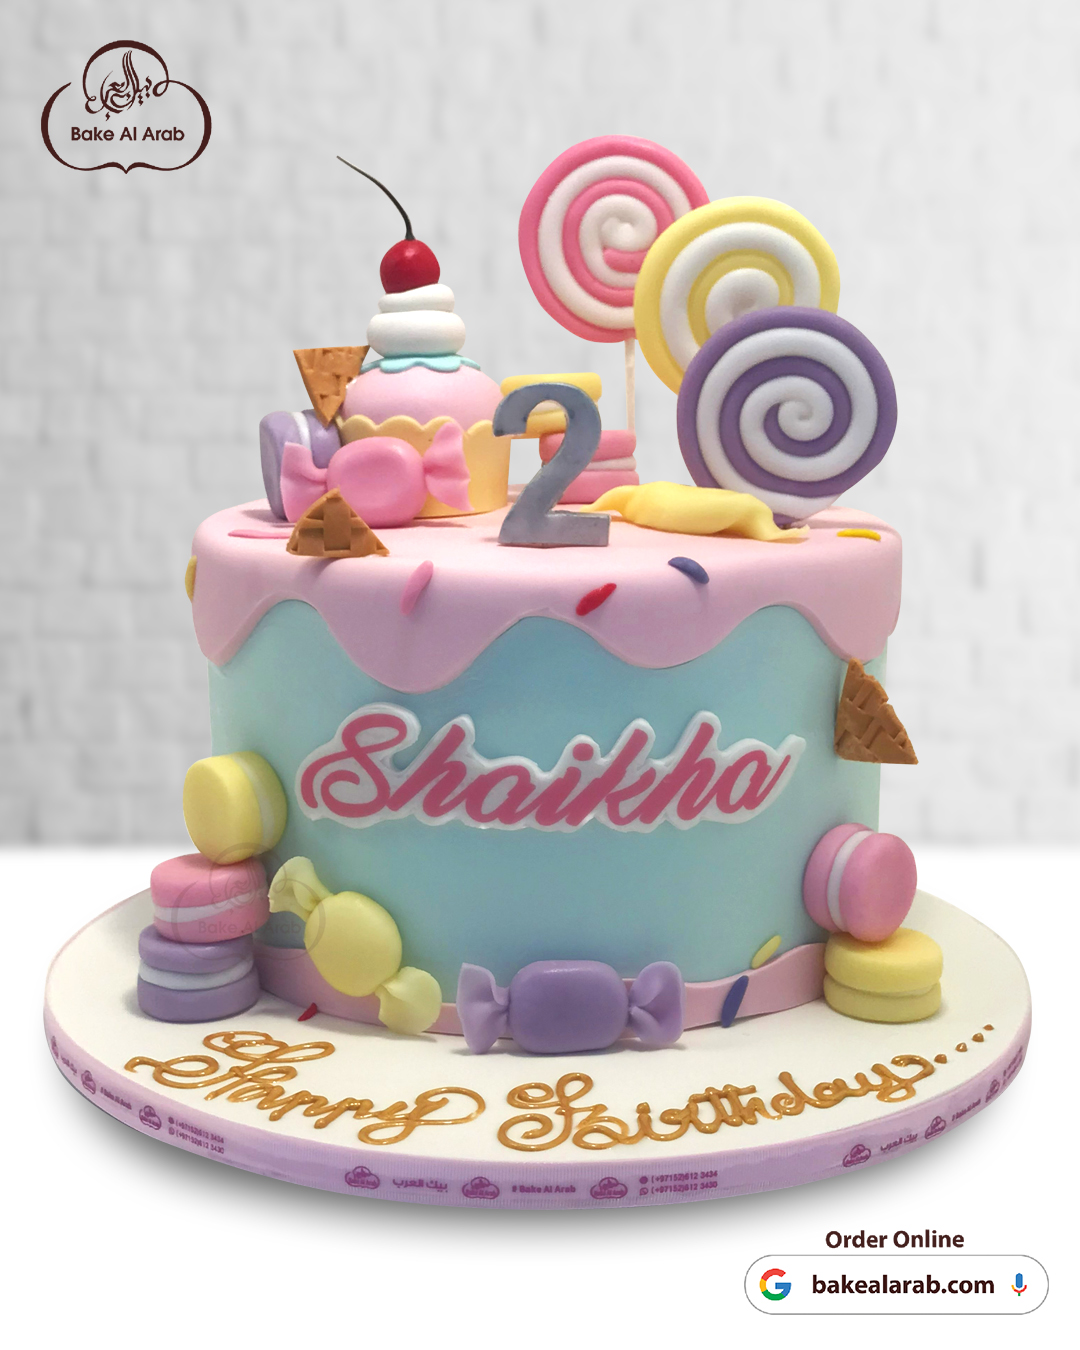 Best Collection of Customized Cakes in UAE